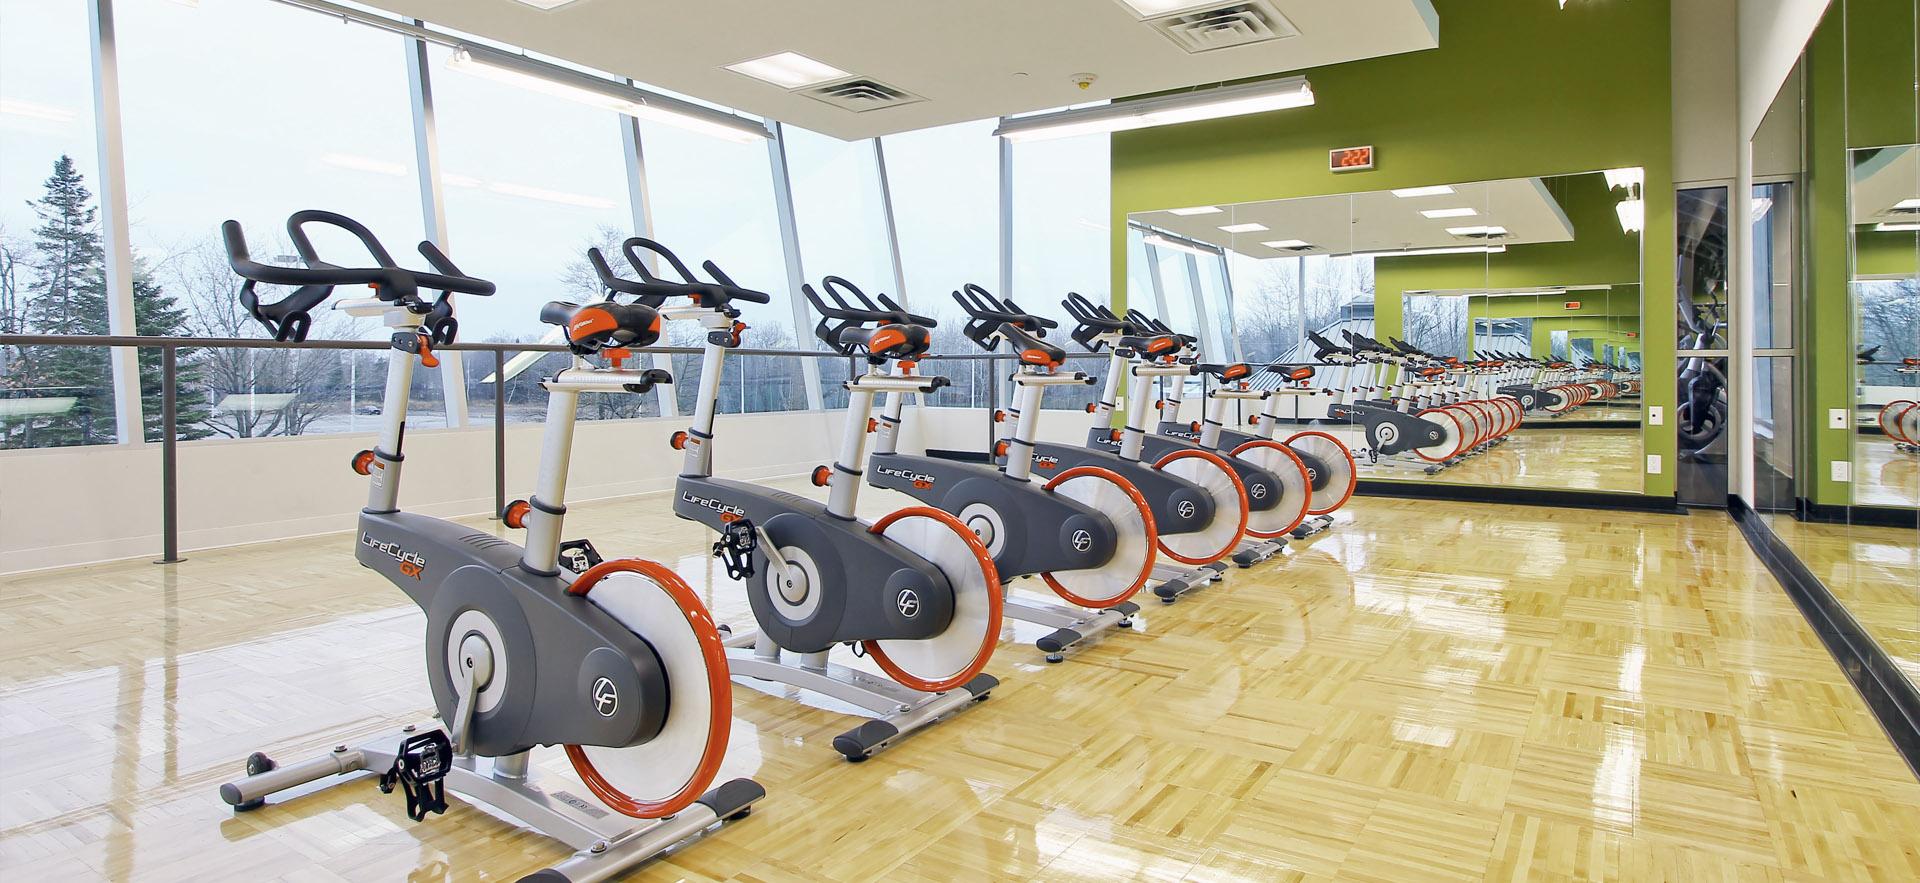 Row of bikes in fitness room